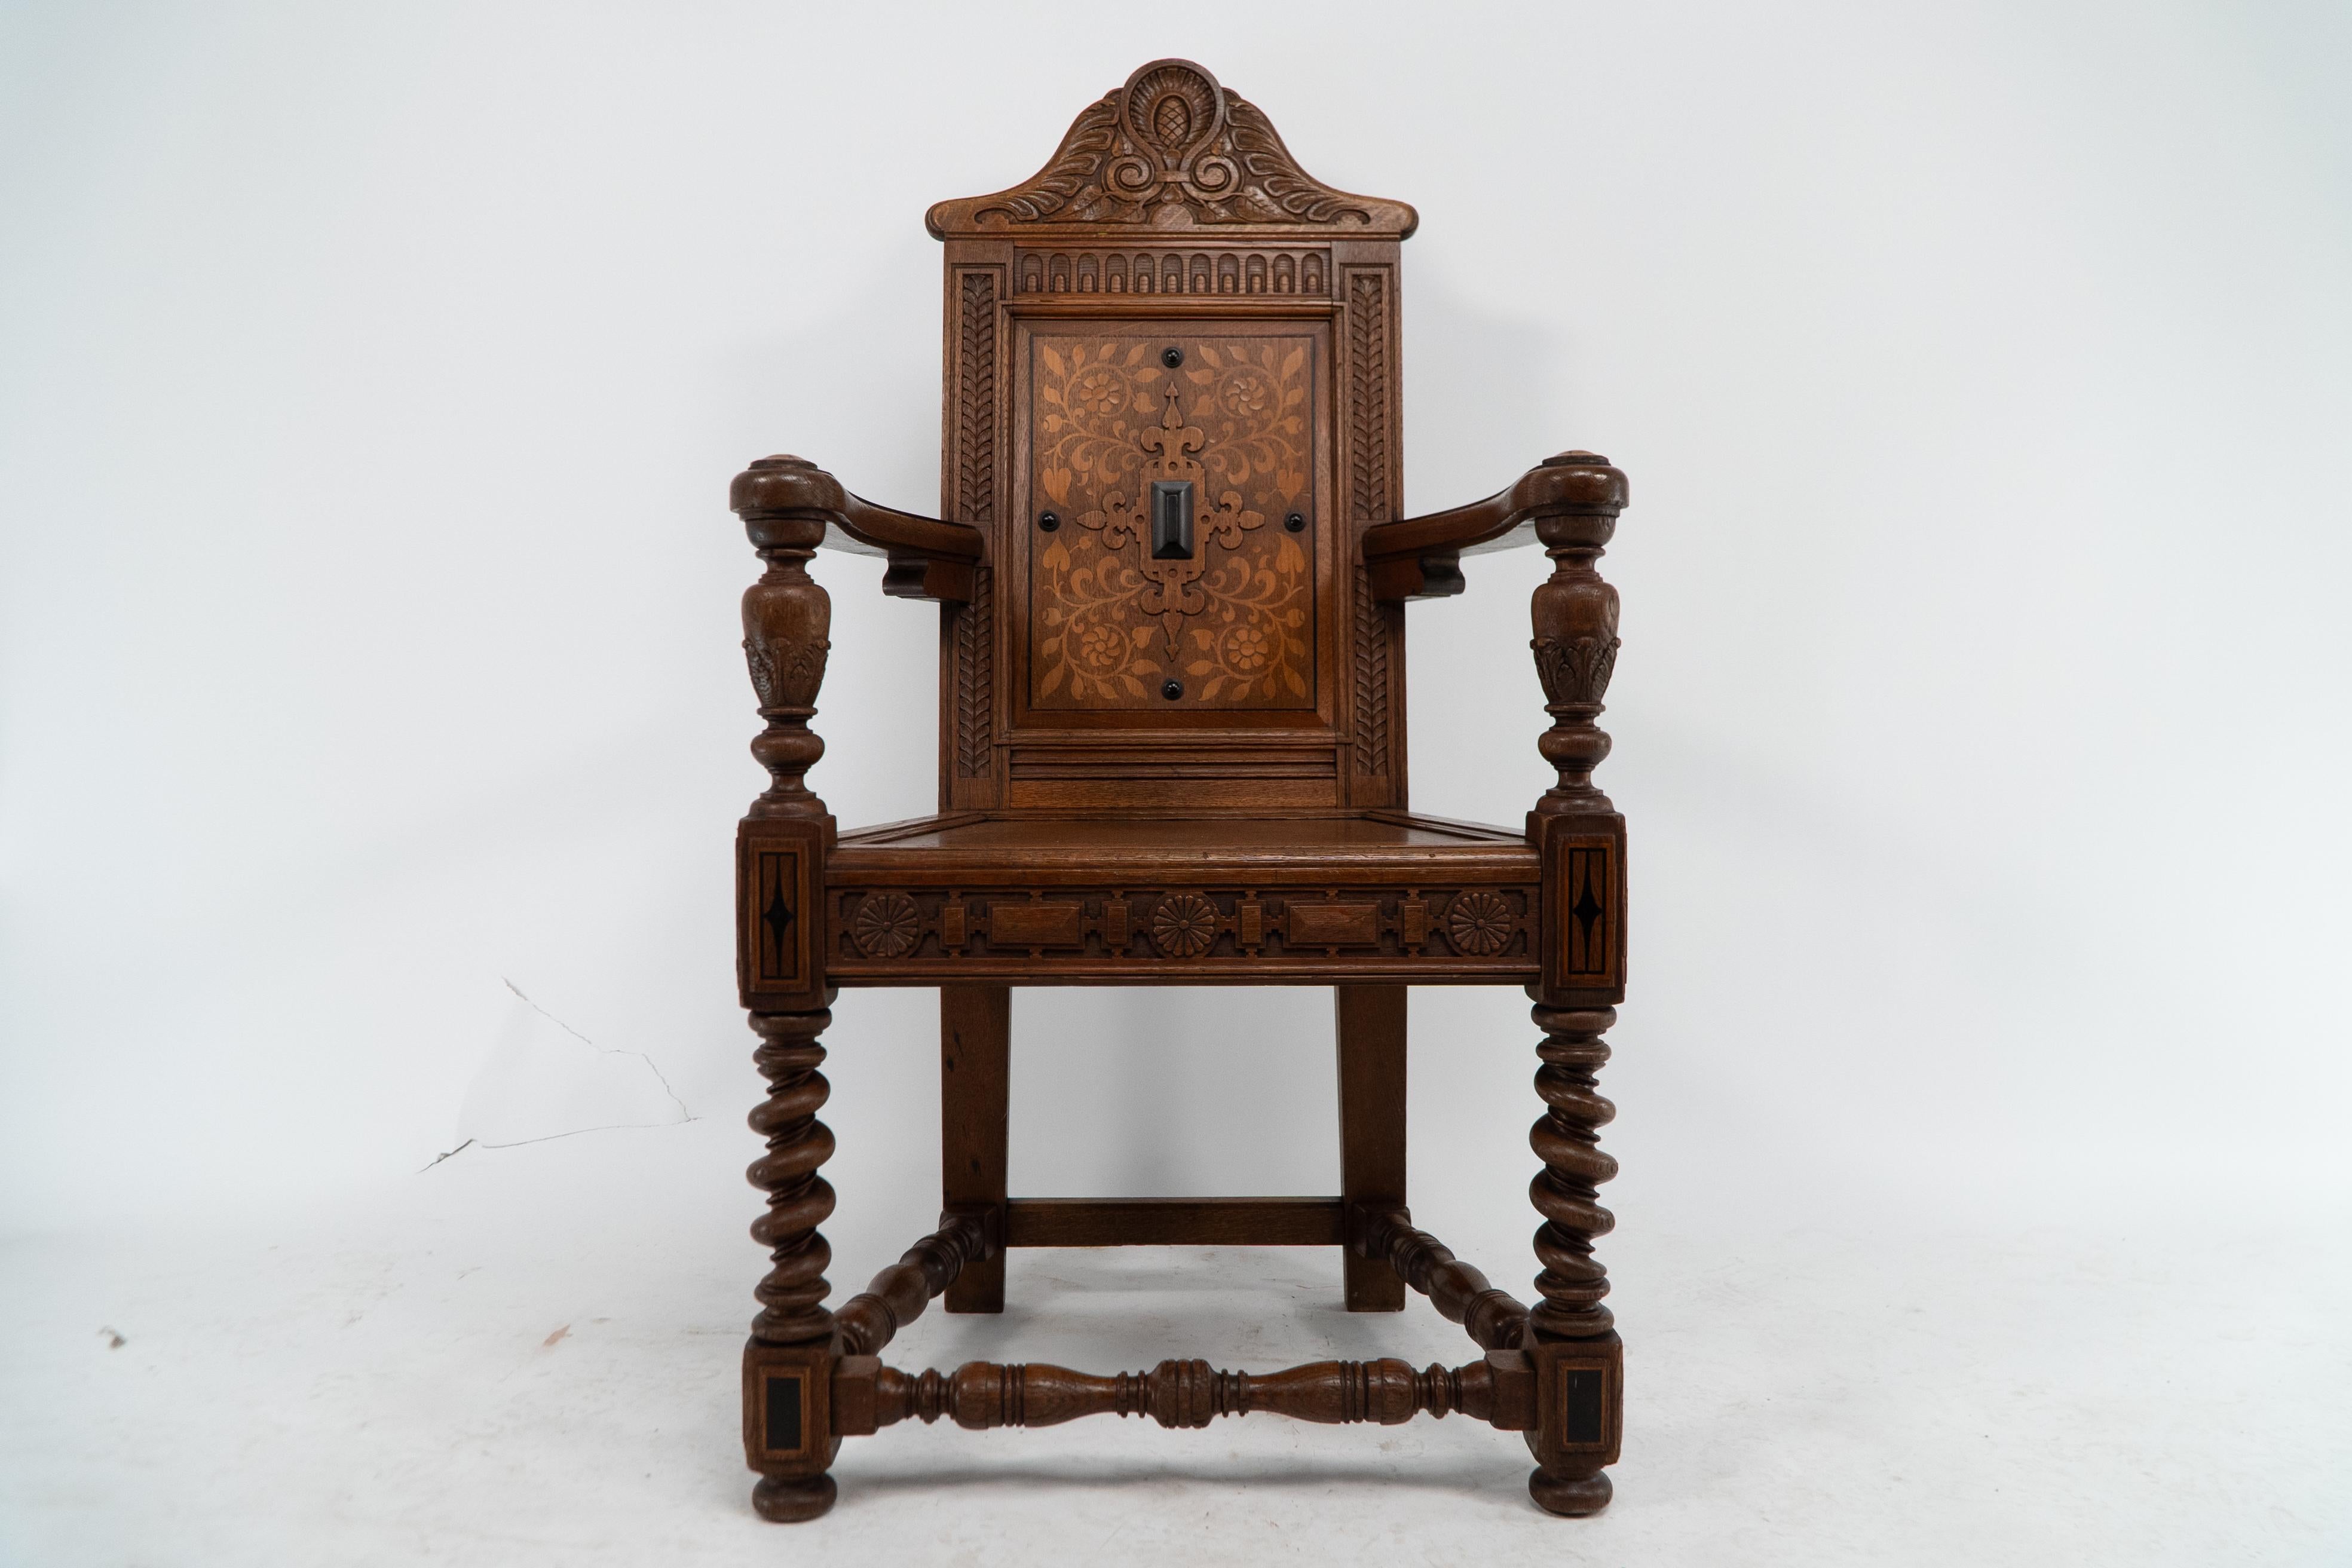 English E W Godwin. An Aesthetic Movement Shakespeare armchair with marquetry decoration For Sale